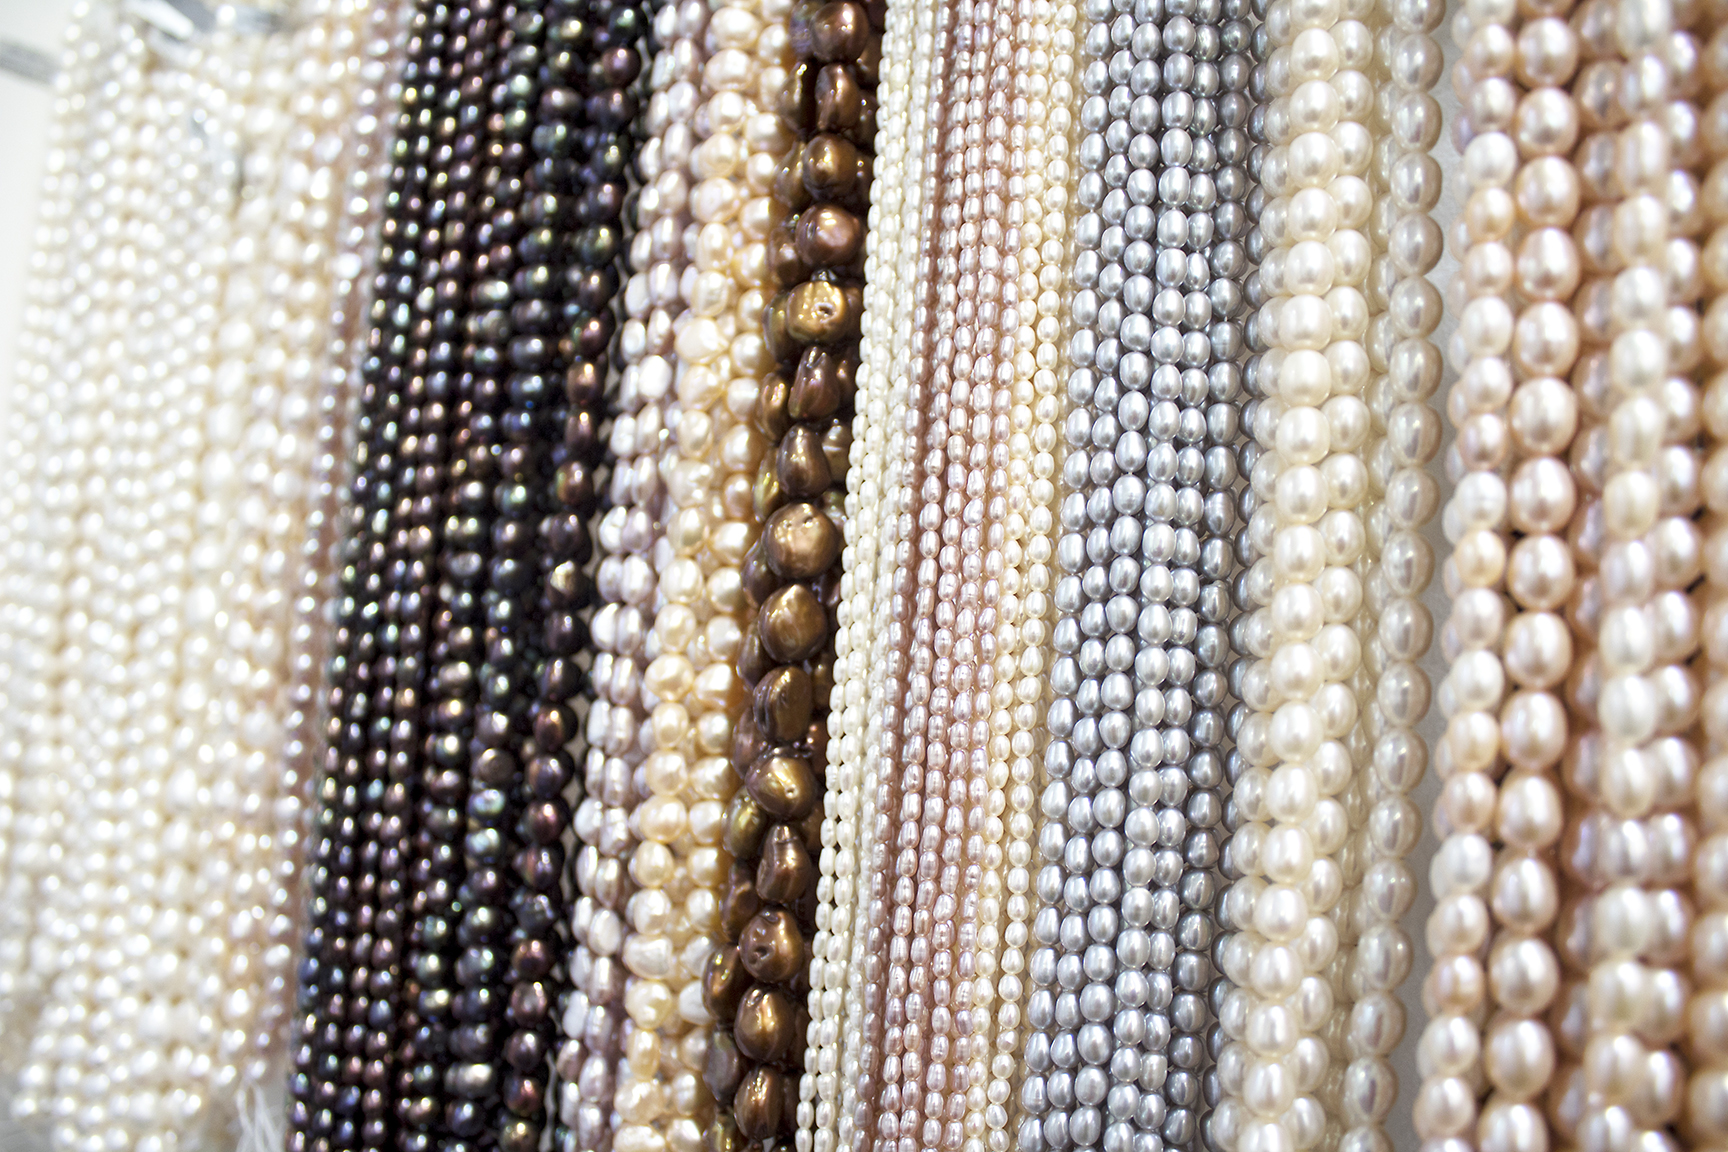 5 things to consider when buying and selling pearls.